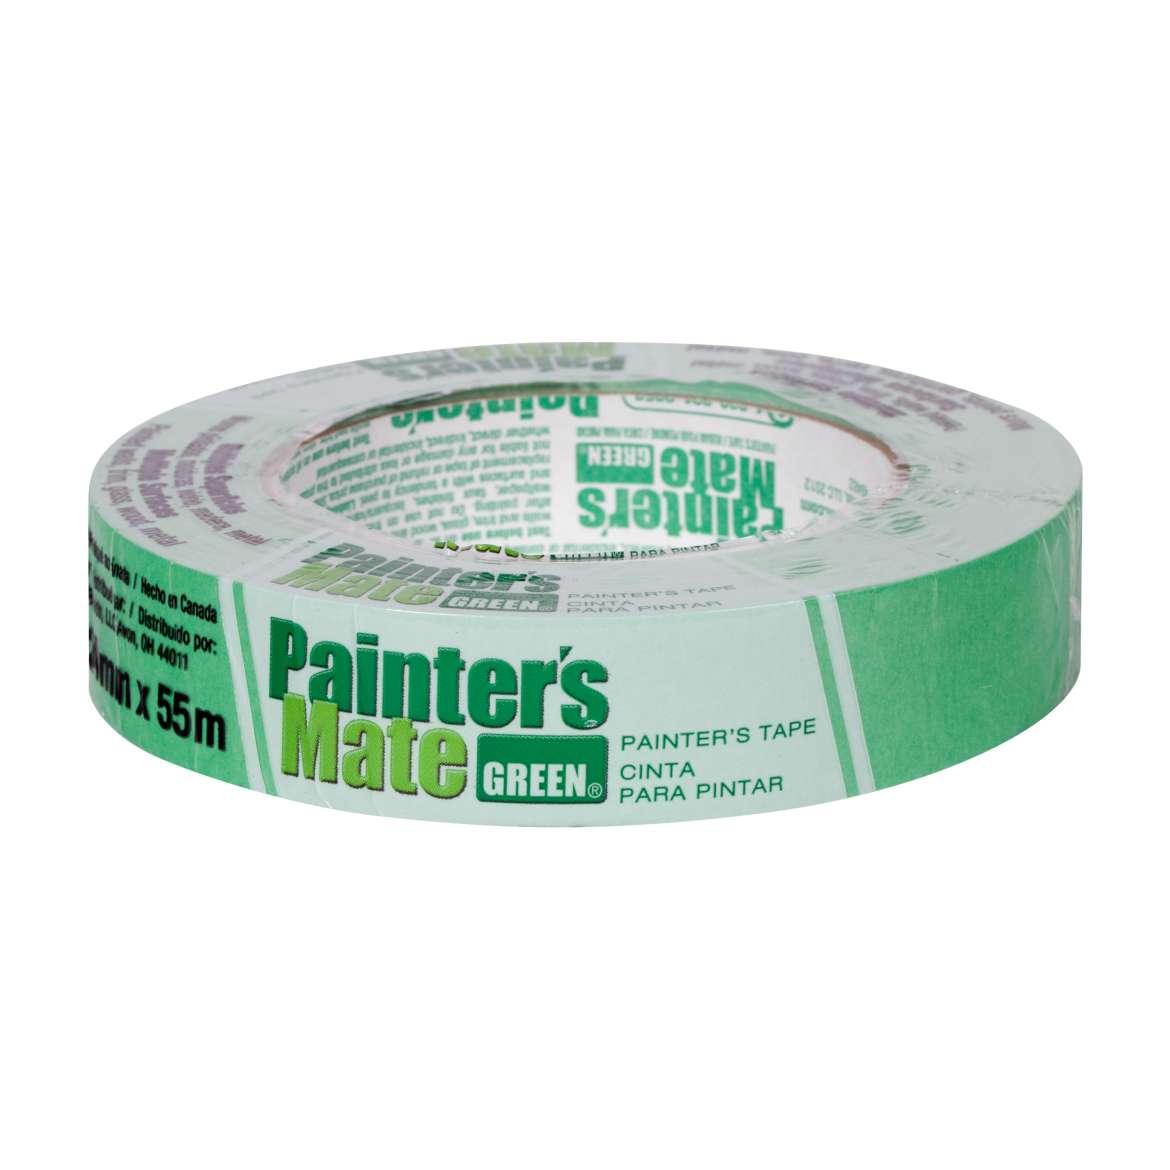 Painter's Mate Green Painter's Tape - Green, .94 in. x 60 yd. – Howard's  Paint & Wallpaper